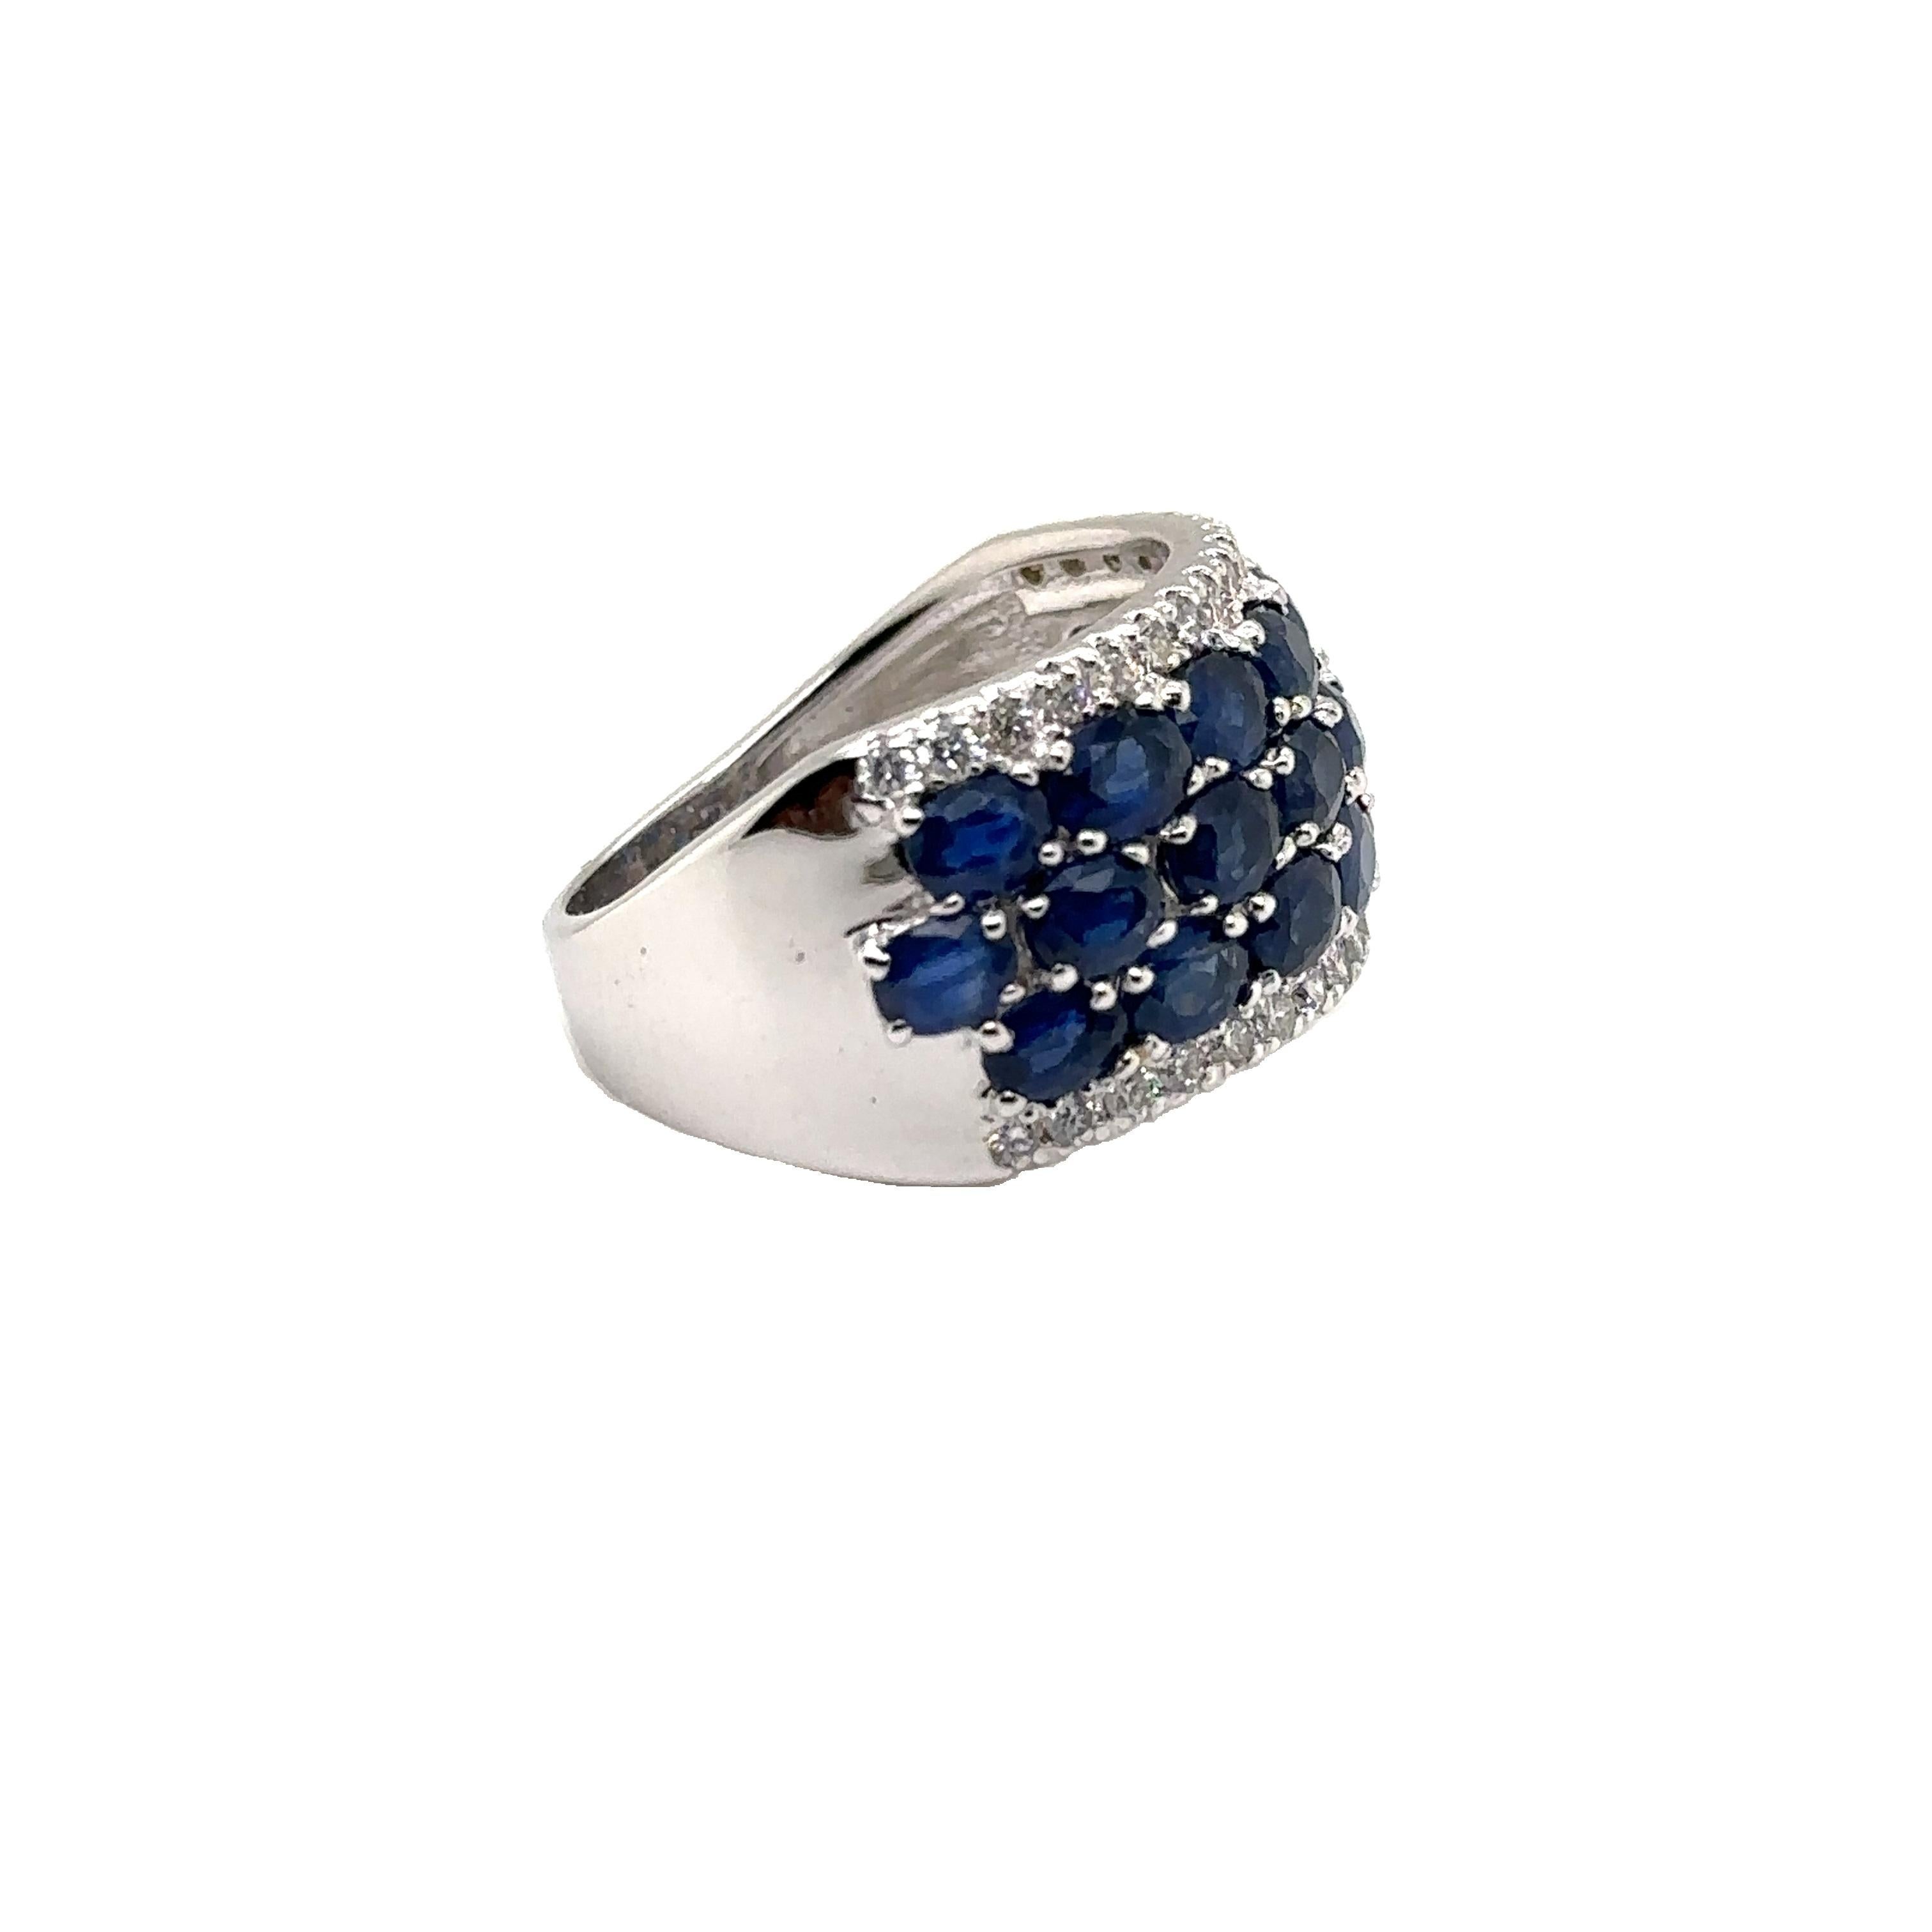 JAS-21-2246 - 14K WHITE GOLD 0.50Ct GH-SI1 DIAMONDS & 4X3 5.50Ct OVAL SAPPHIRES  For Sale 1